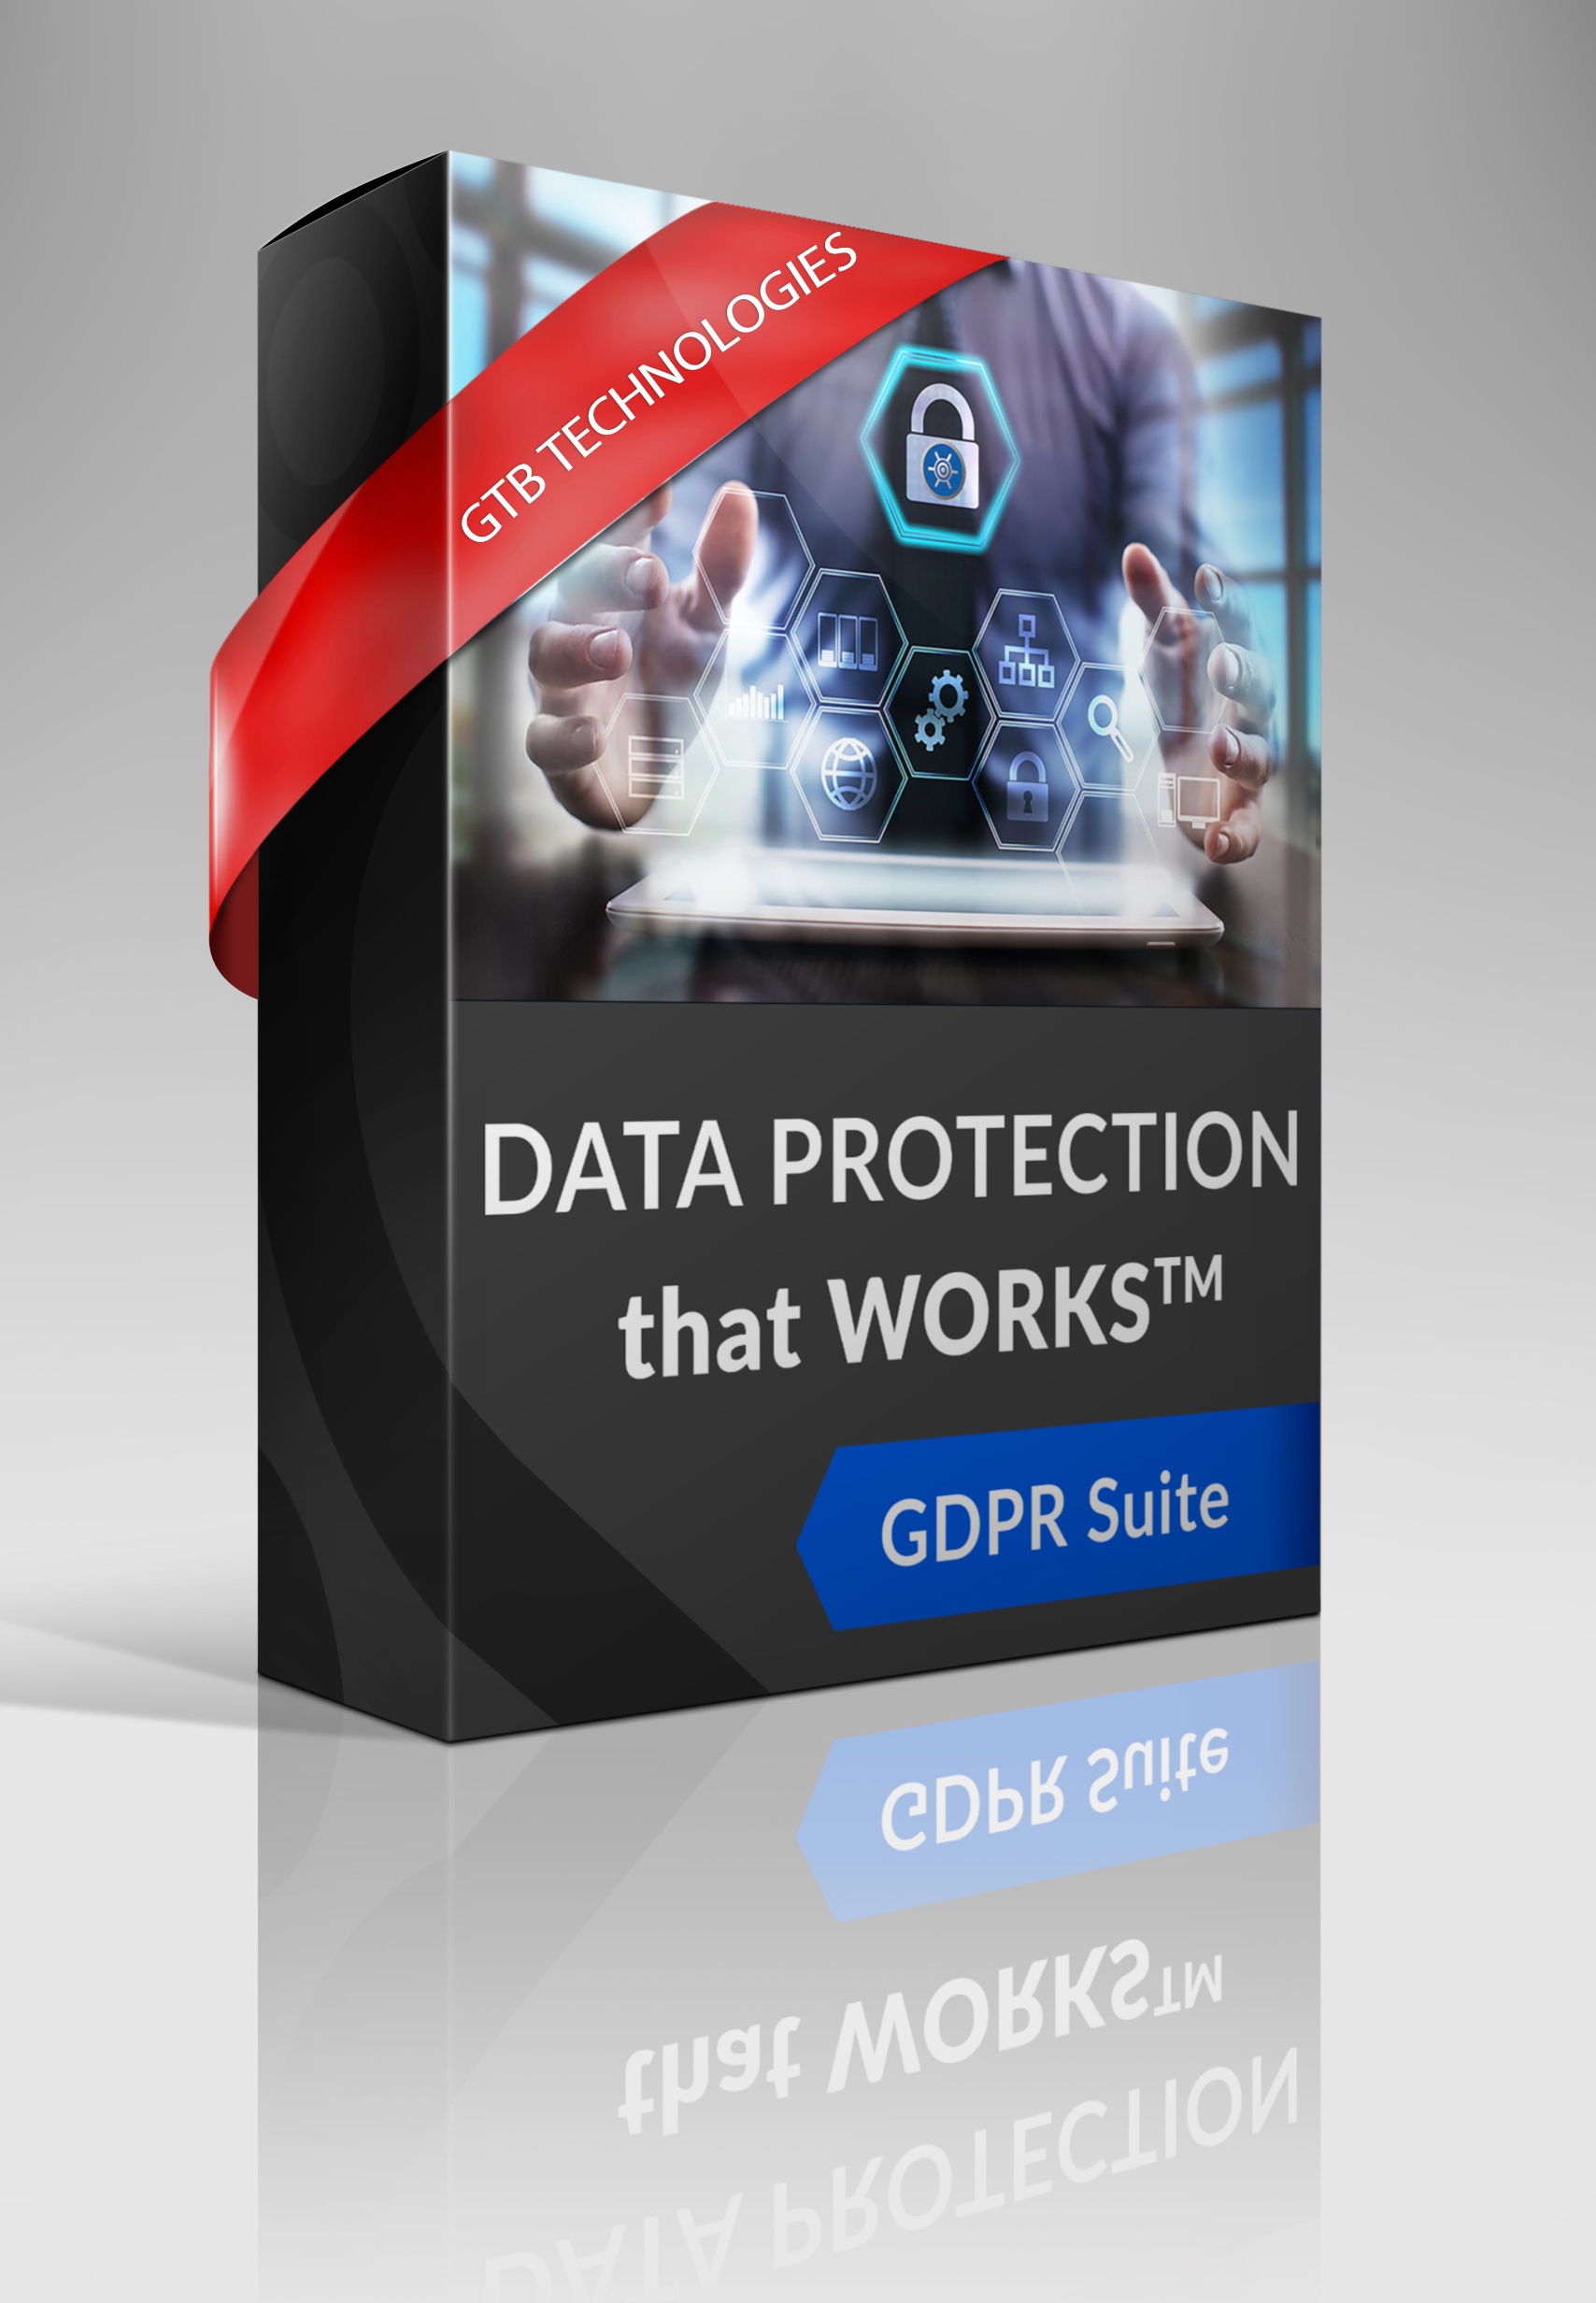 GDPR Data Protection Suite from GTB Technologies